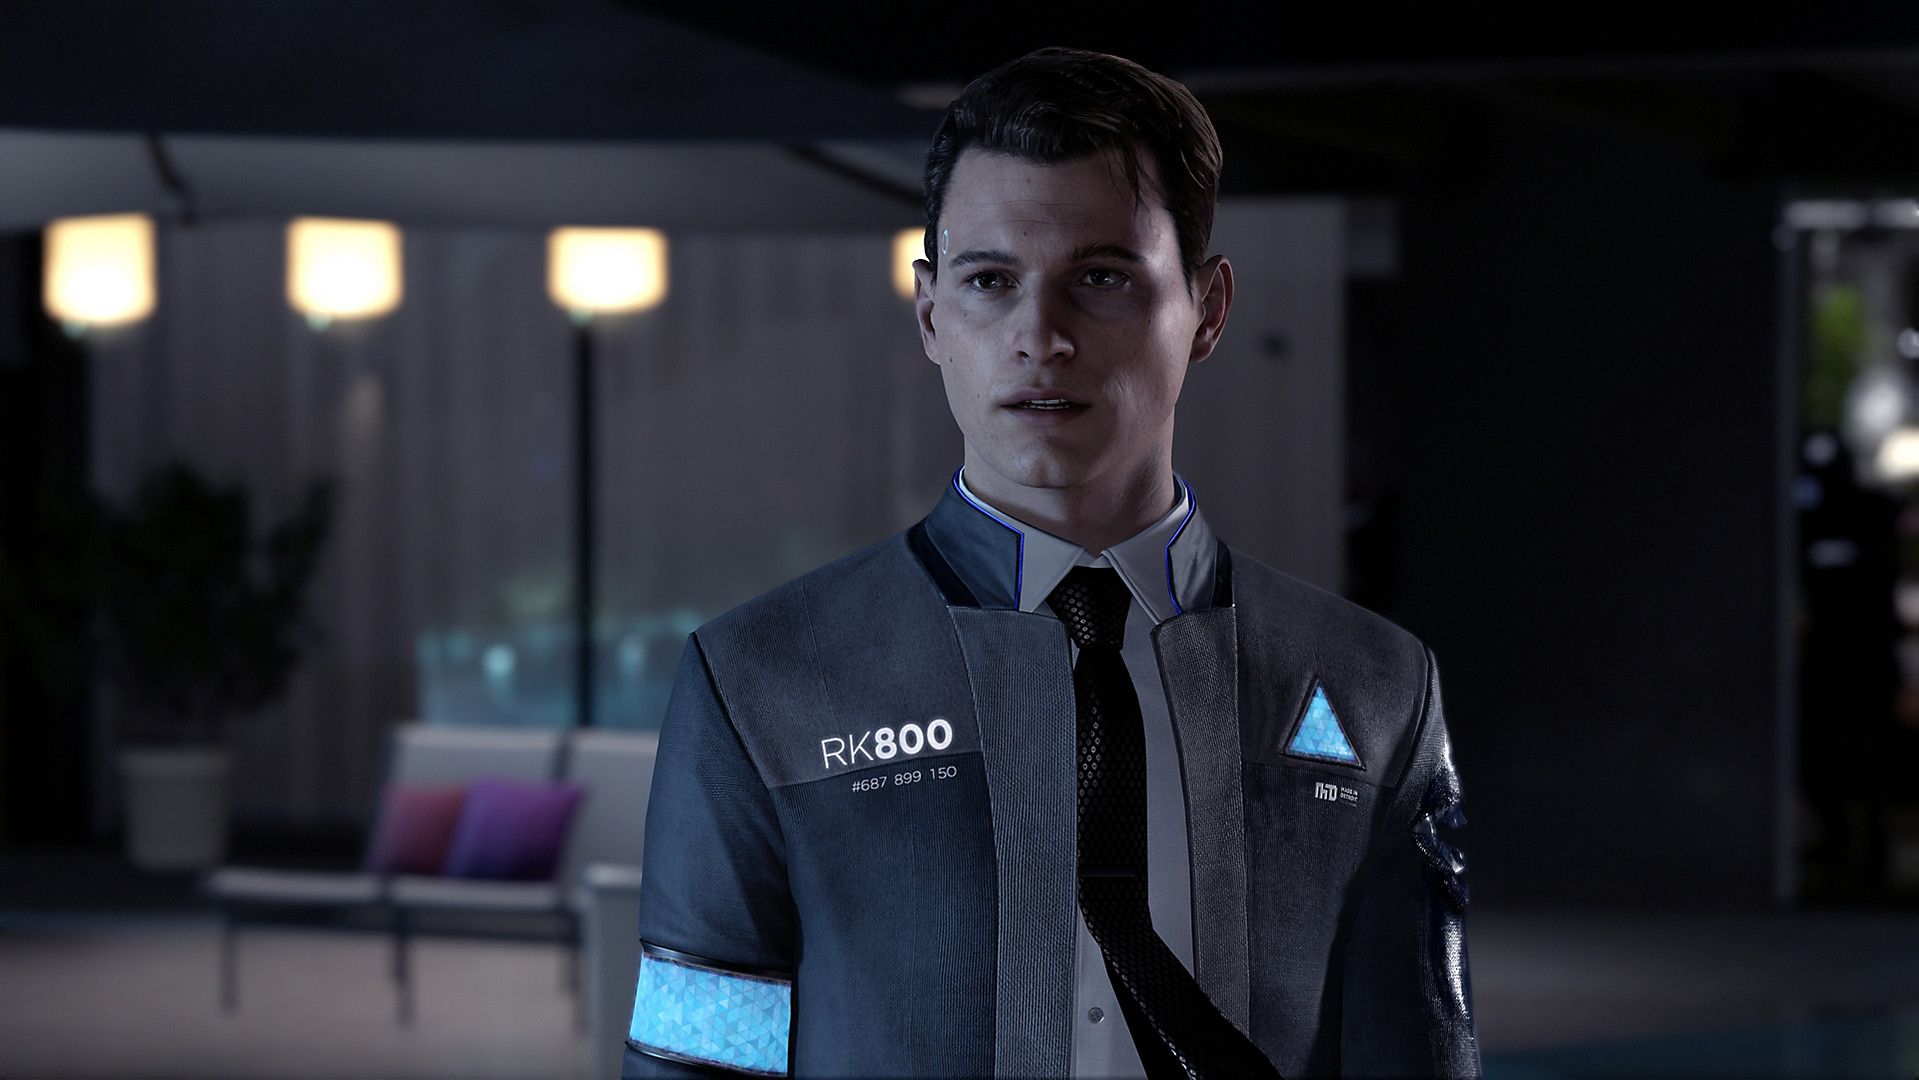 Detroit Become Human Review Interactive Drama (Almost) Tackles Difficult Ideas